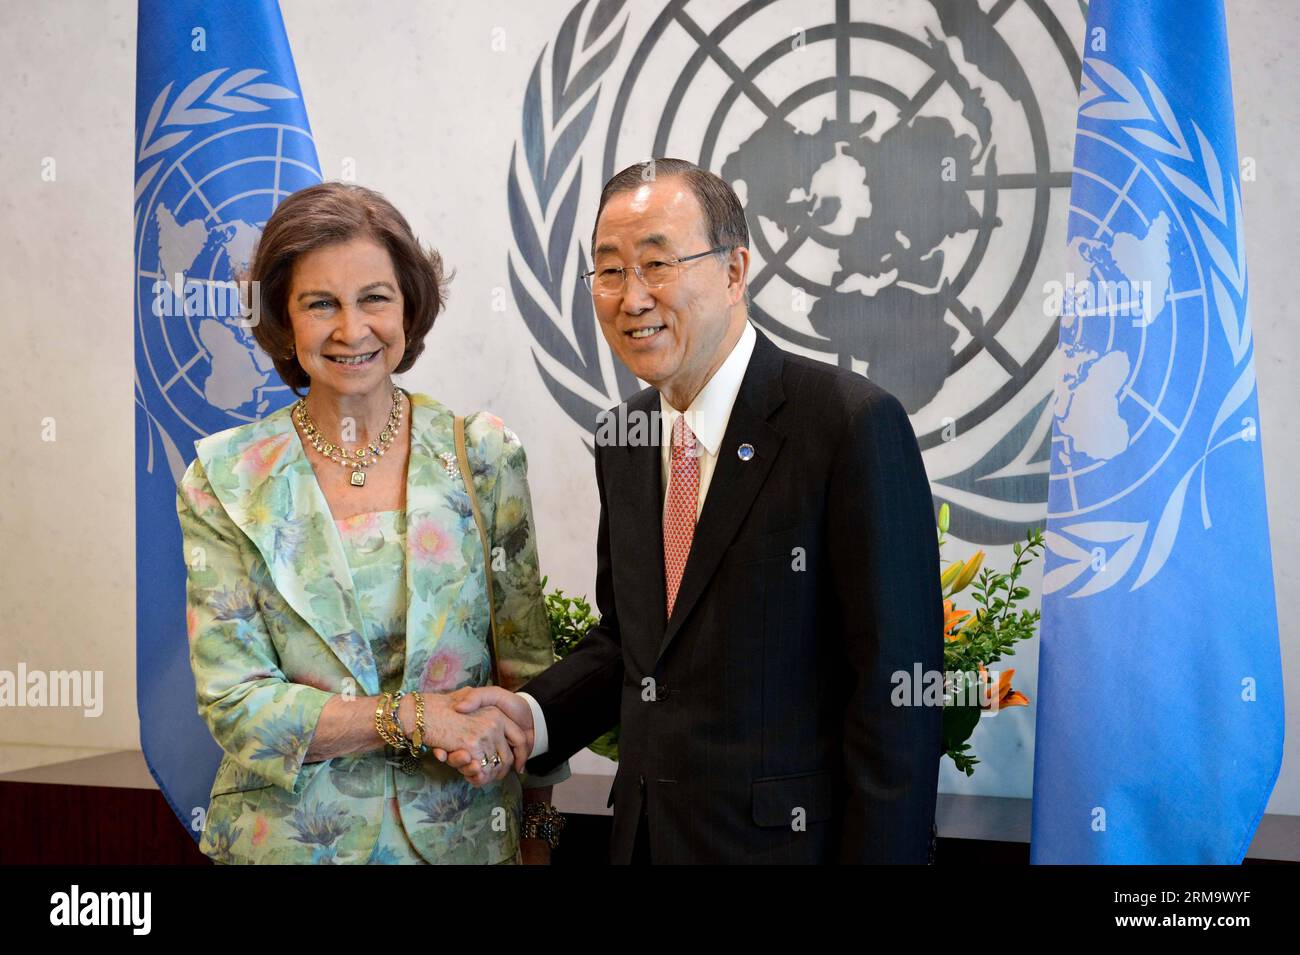 (140603) -- NEW YORK, June 3, 2014 (Xinhua) -- United Nations Secretary-General Ban Ki-moon (R) shakes hands with Queen Sofia of Spain prior to their meeting at the UN headquarters in New York, on June 3, 2014, a day after King Juan Carlos of Spain announced his abdication in favor of his son, the 46-year-old Crown Prince Felipe. (Xinhua/Niu Xiaolei) UN-NEW YORK-SPAIN-QUEEN-VISIT PUBLICATIONxNOTxINxCHN   New York June 3 2014 XINHUA United Nations Secretary General Ban KI Moon r Shakes Hands With Queen Sofia of Spain Prior to their Meeting AT The UN Headquarters in New York ON June 3 2014 a Day Stock Photo